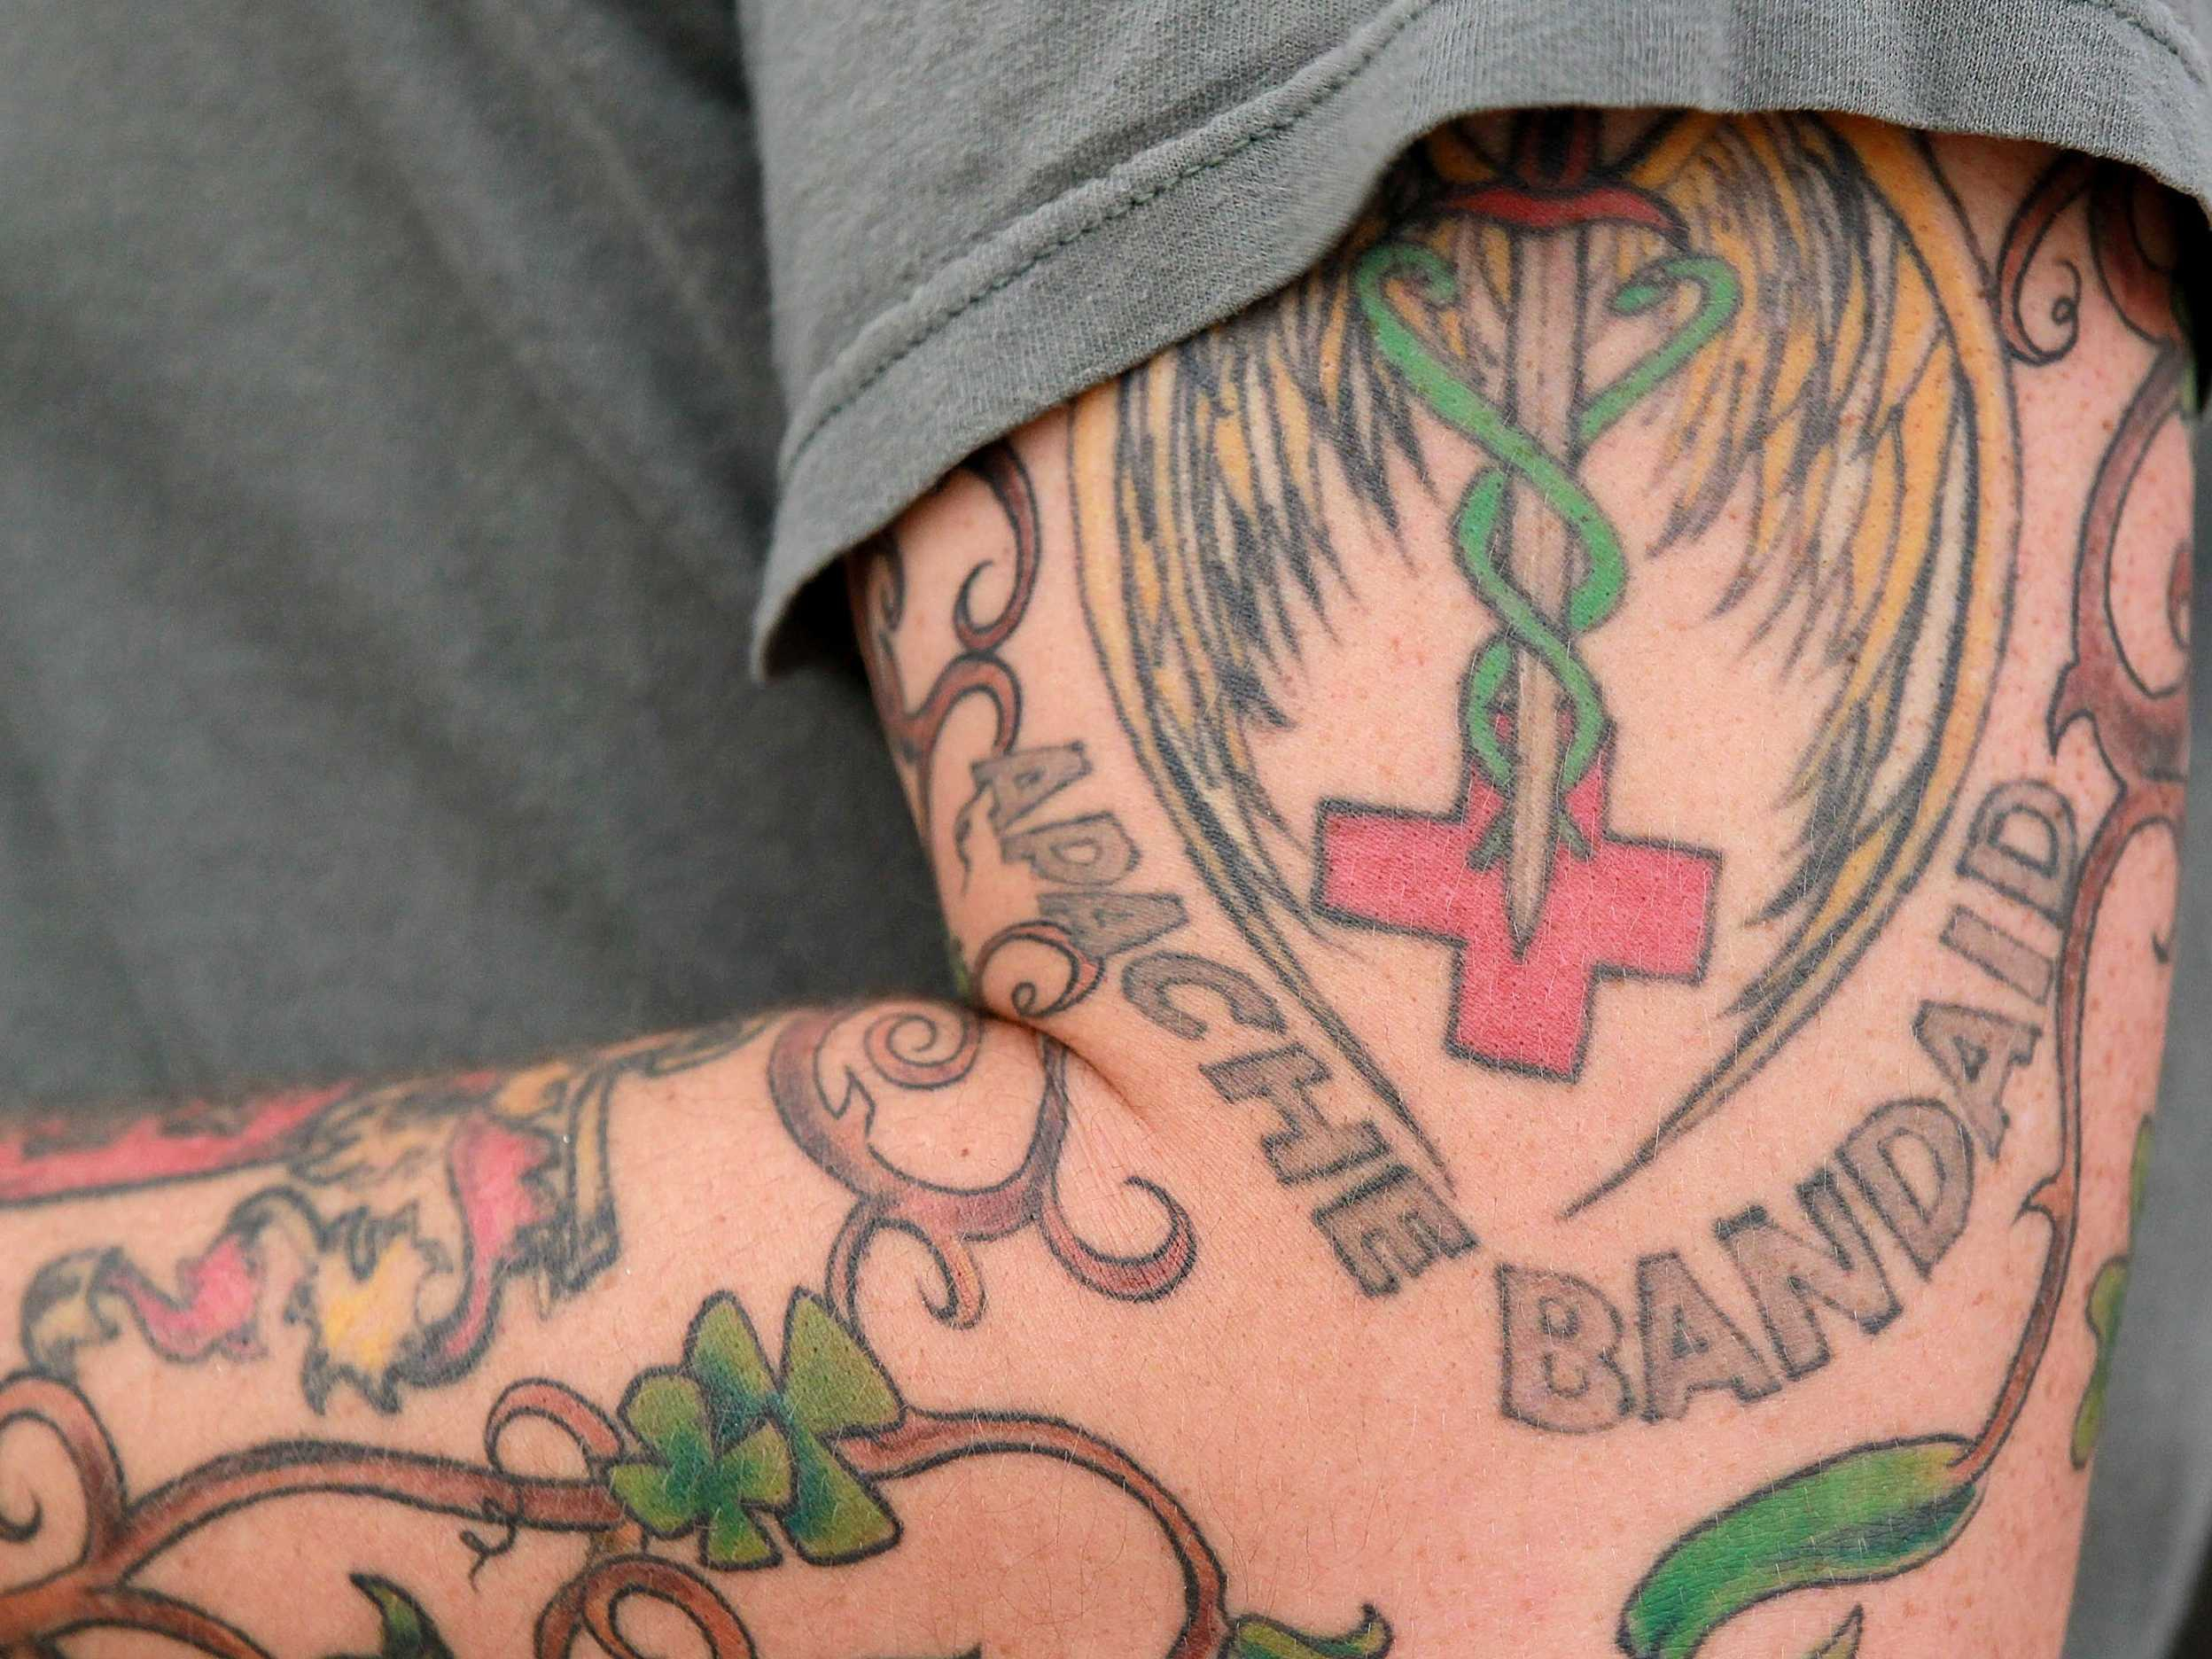 Army Tattoo Regulations Are Set To Change And Soldiers Arent Happy with dim...